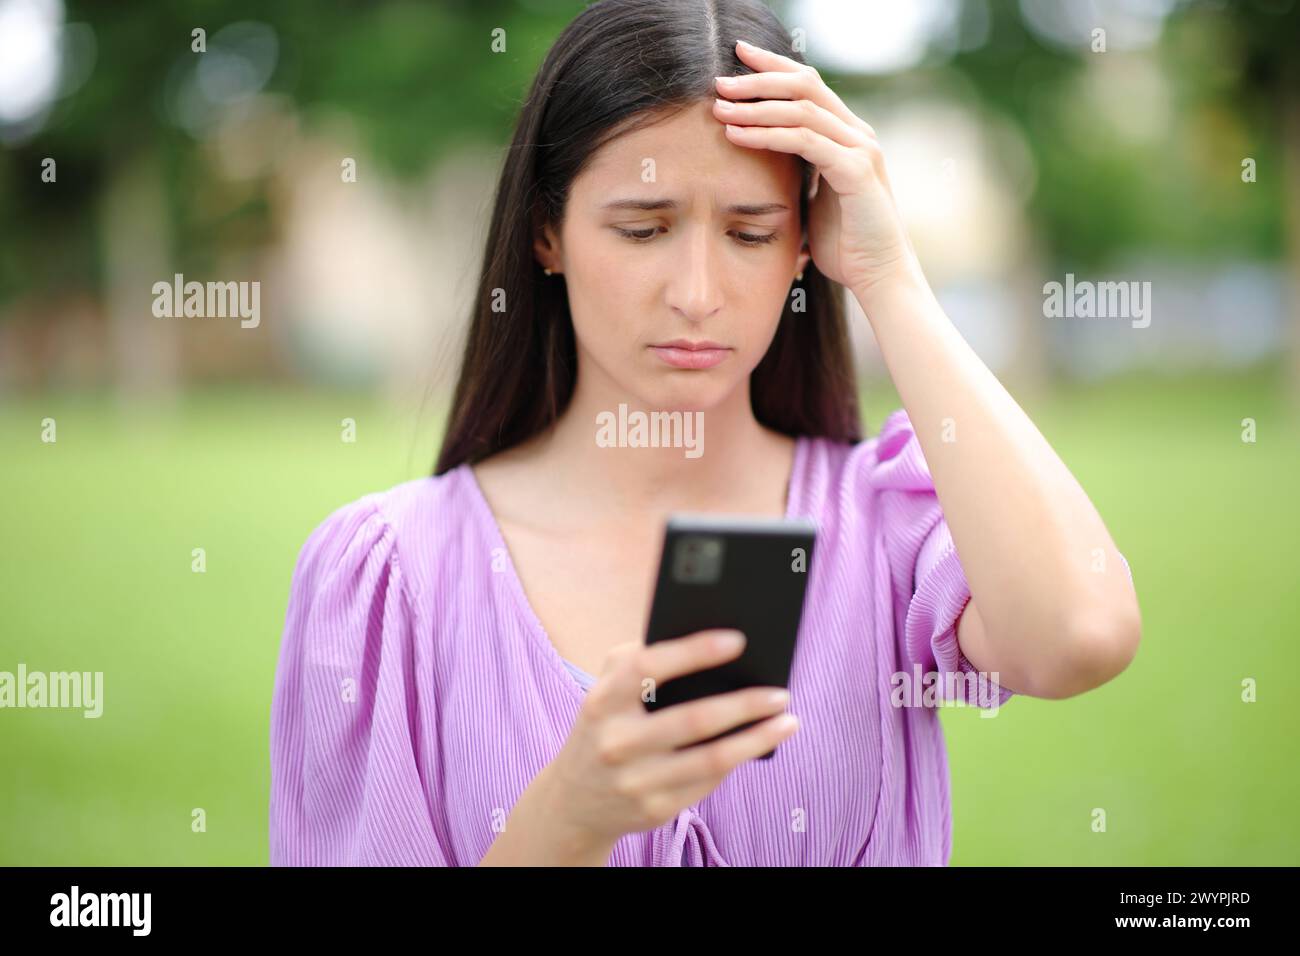 Front view portrait of a worried woman checking bad news on smart phone in a park Stock Photo